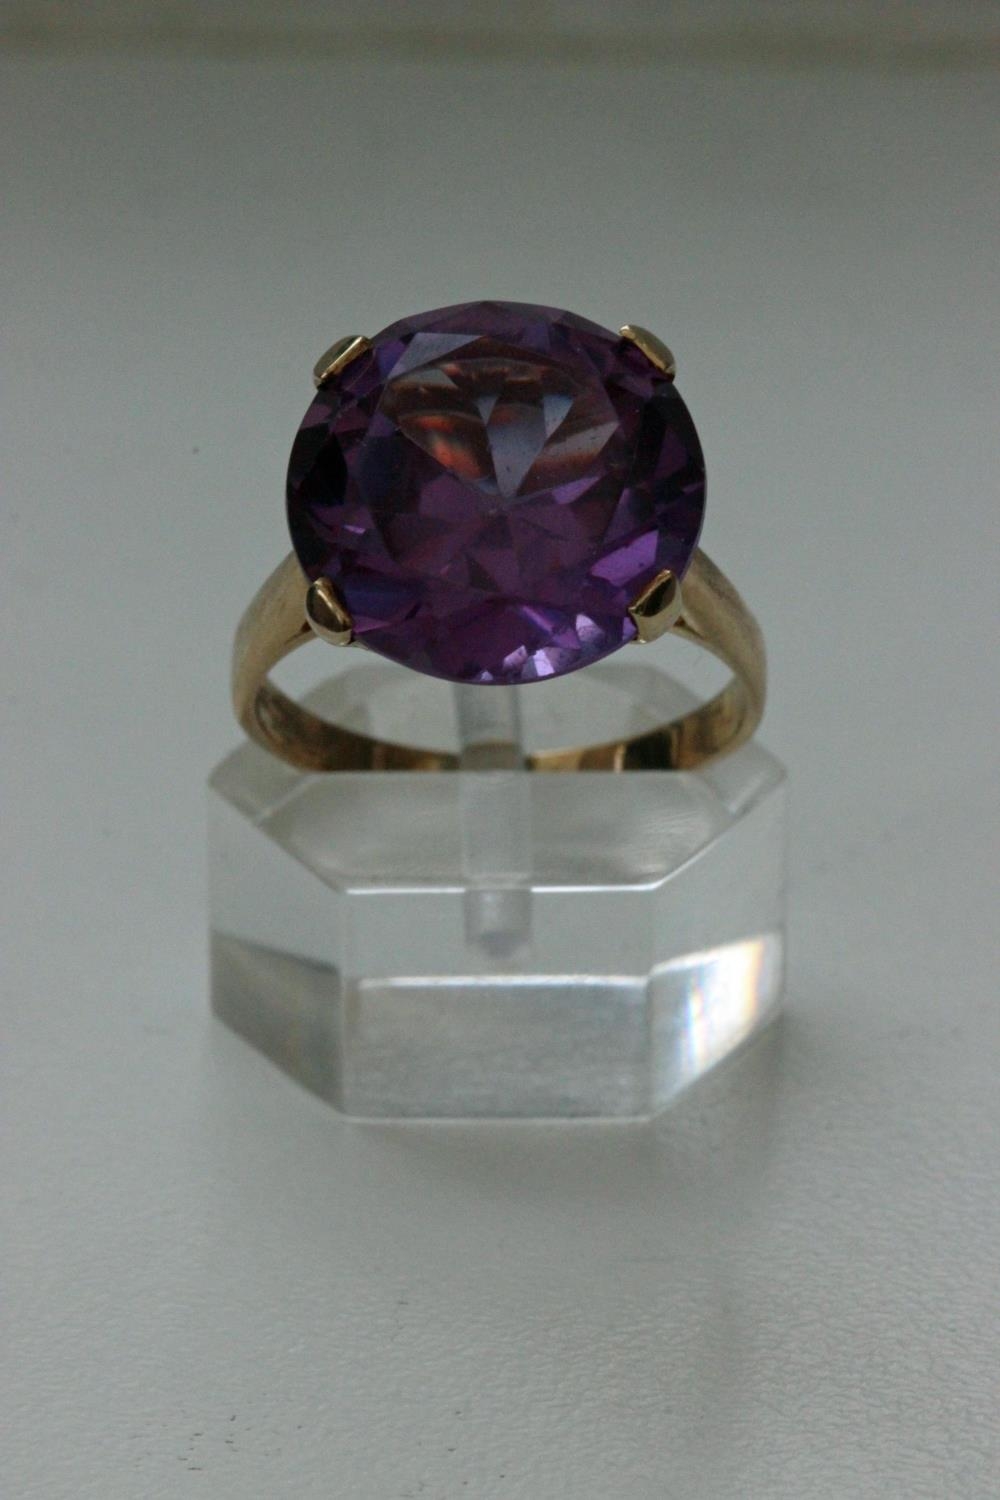 9ct Gold & Alexandrite Ring. Often described by gem aficionados as “emerald by day, ruby by